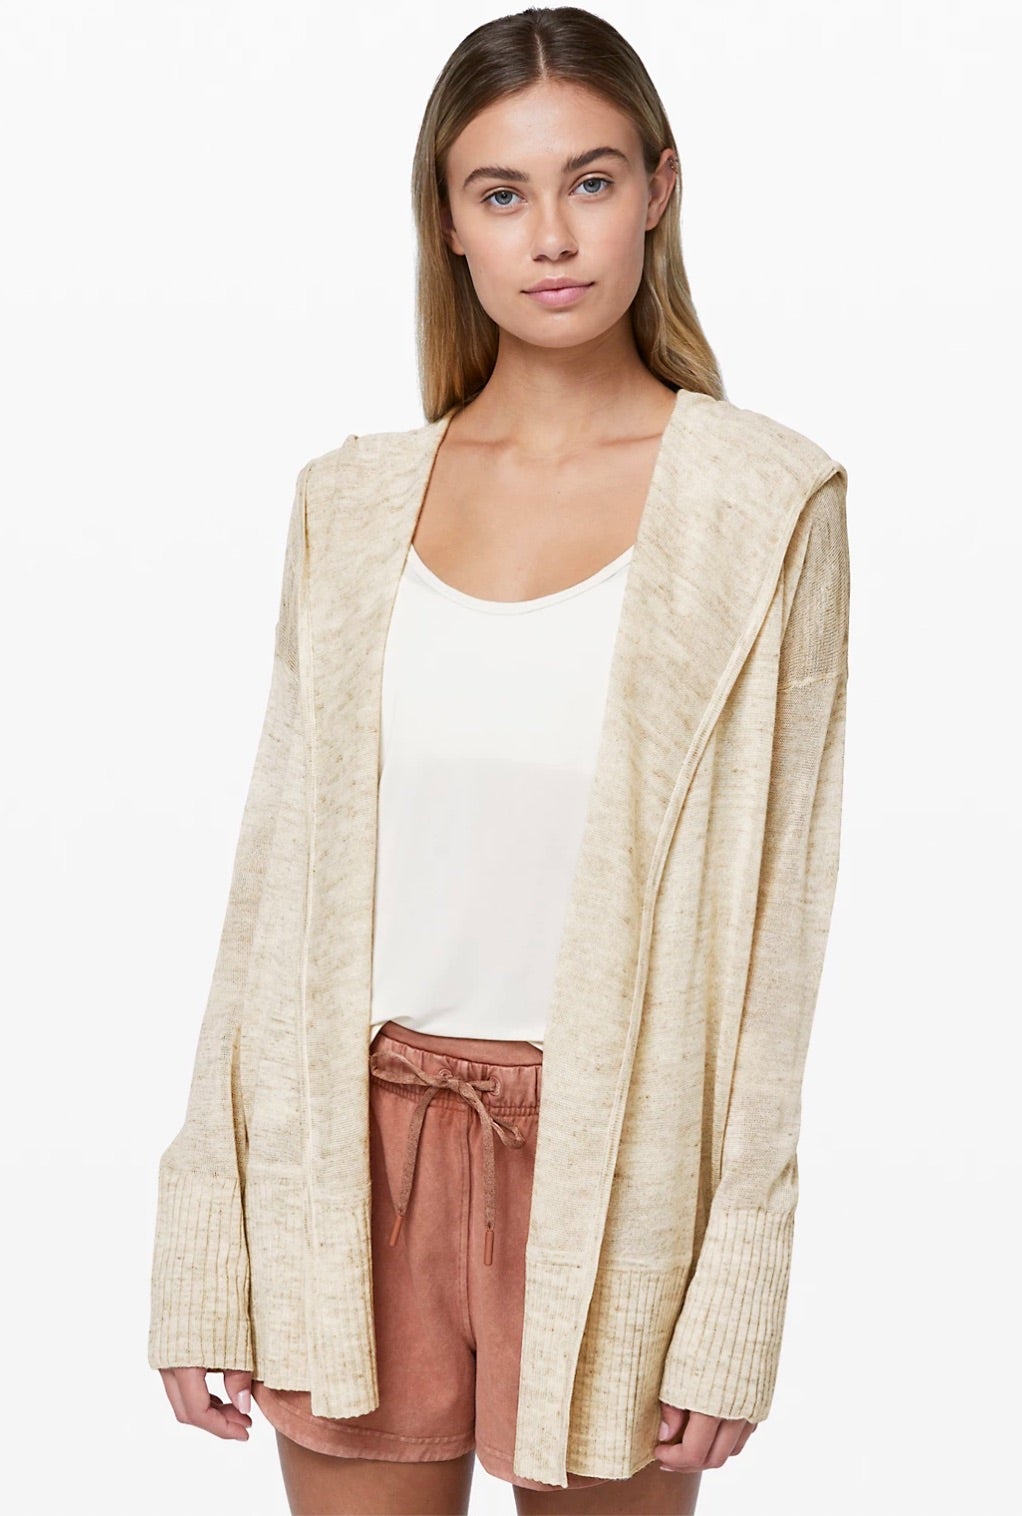 Lululemon Calm and Collected Wrap